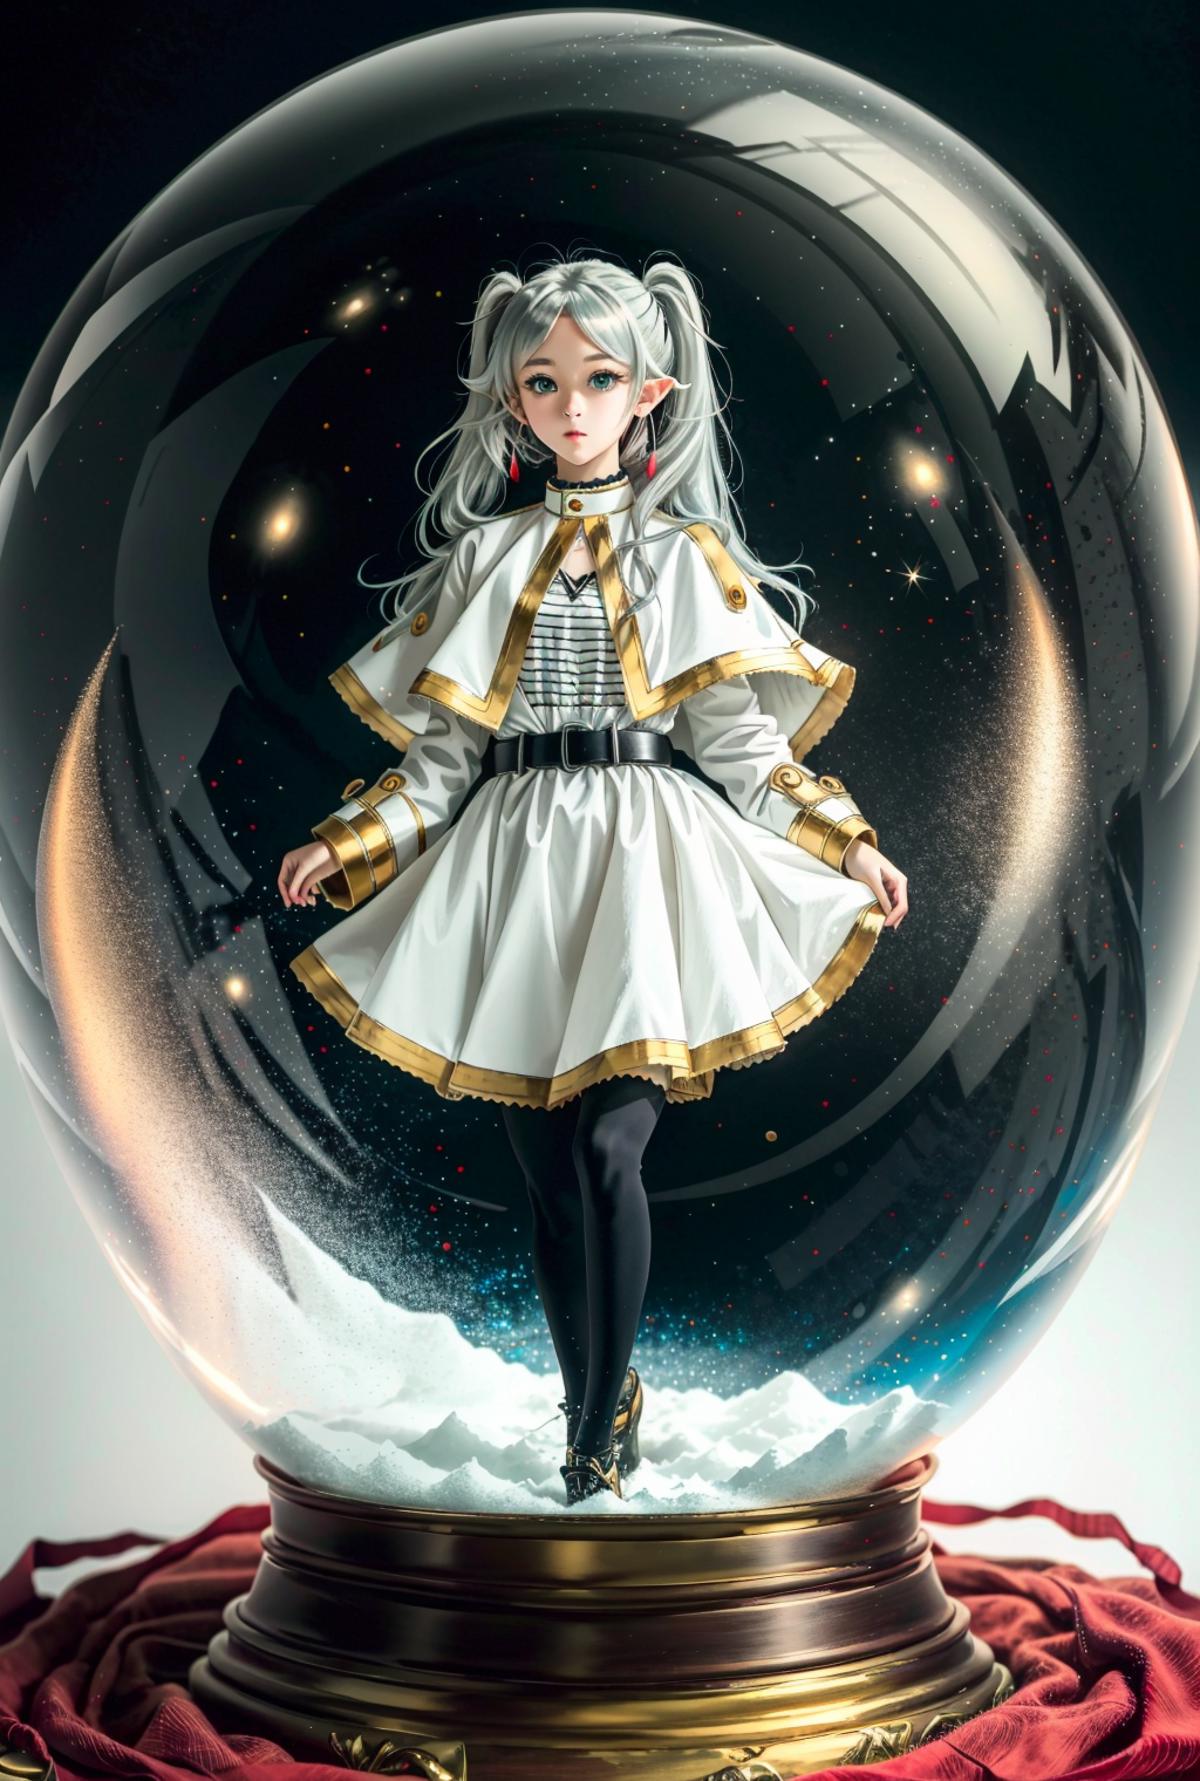 Inside a Snow Globe (Concept) image by fansay